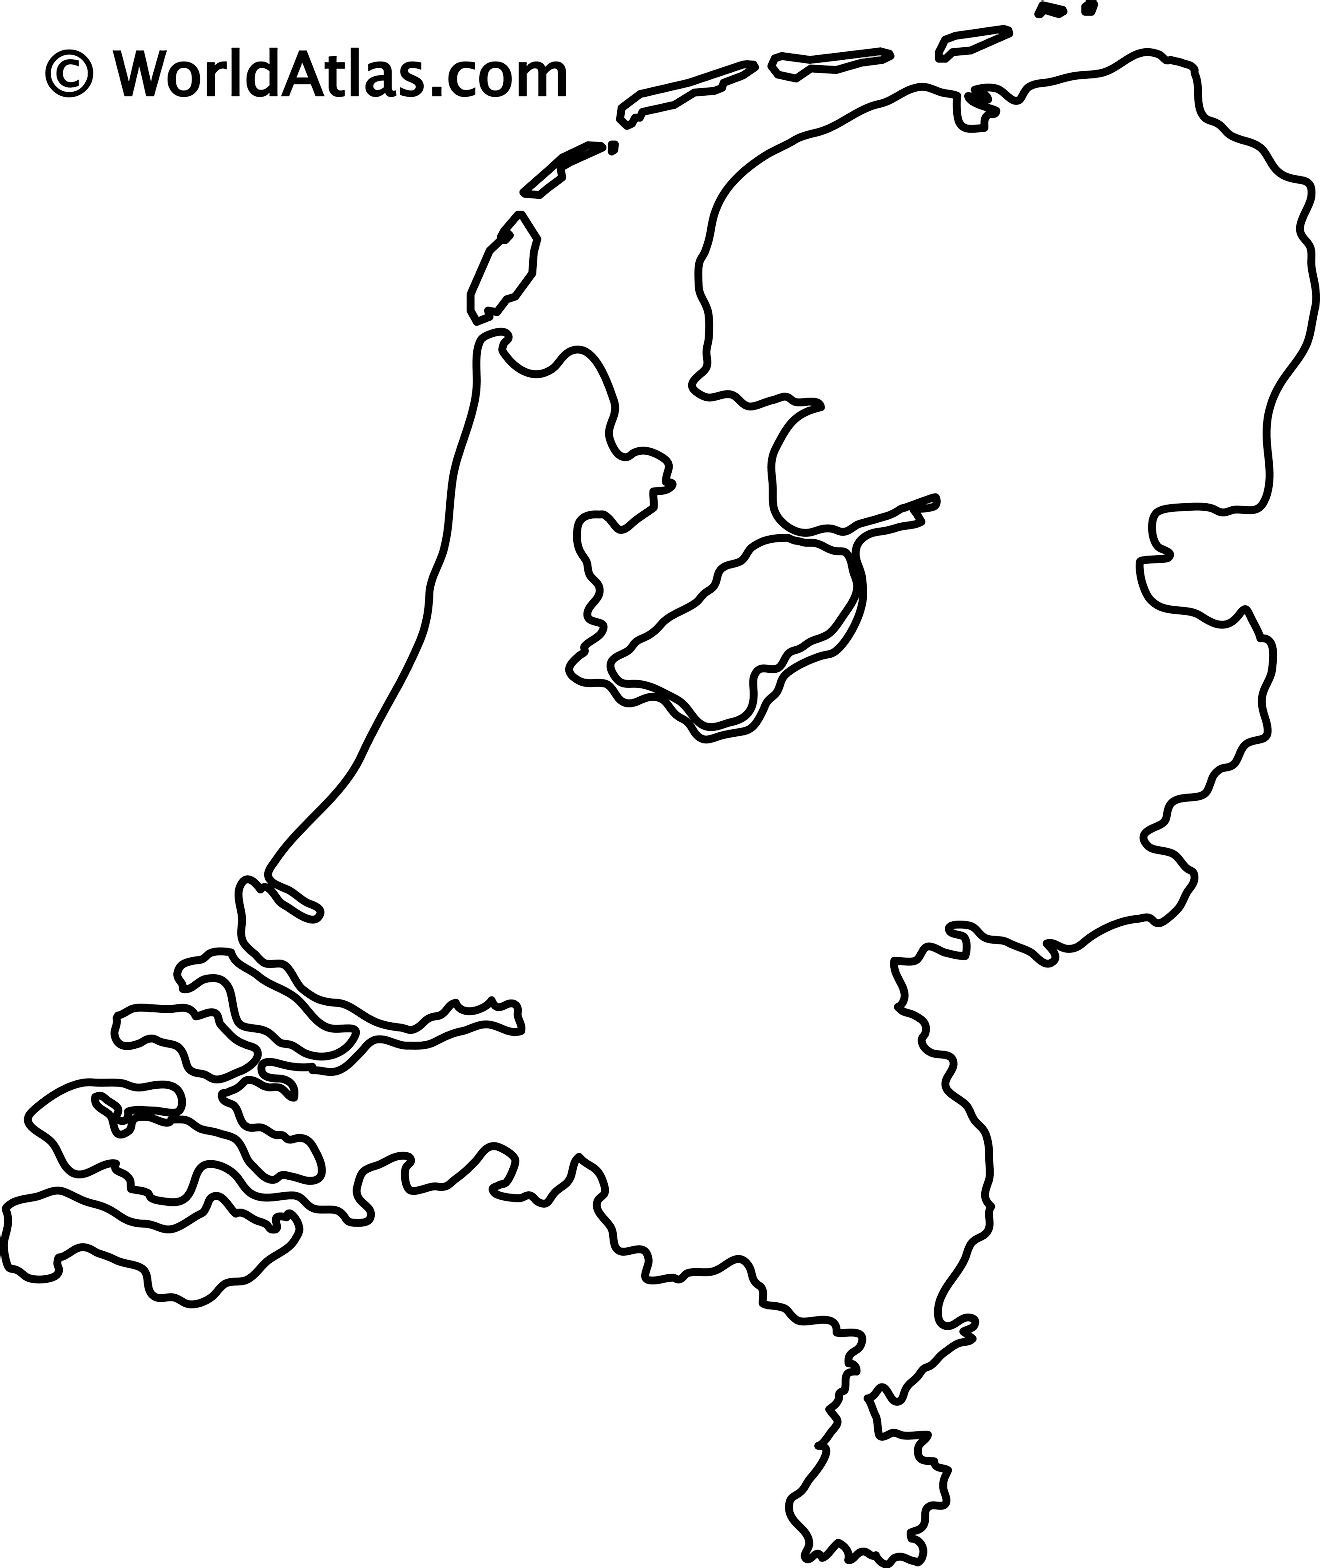 Blank Outline Map of The Netherlands